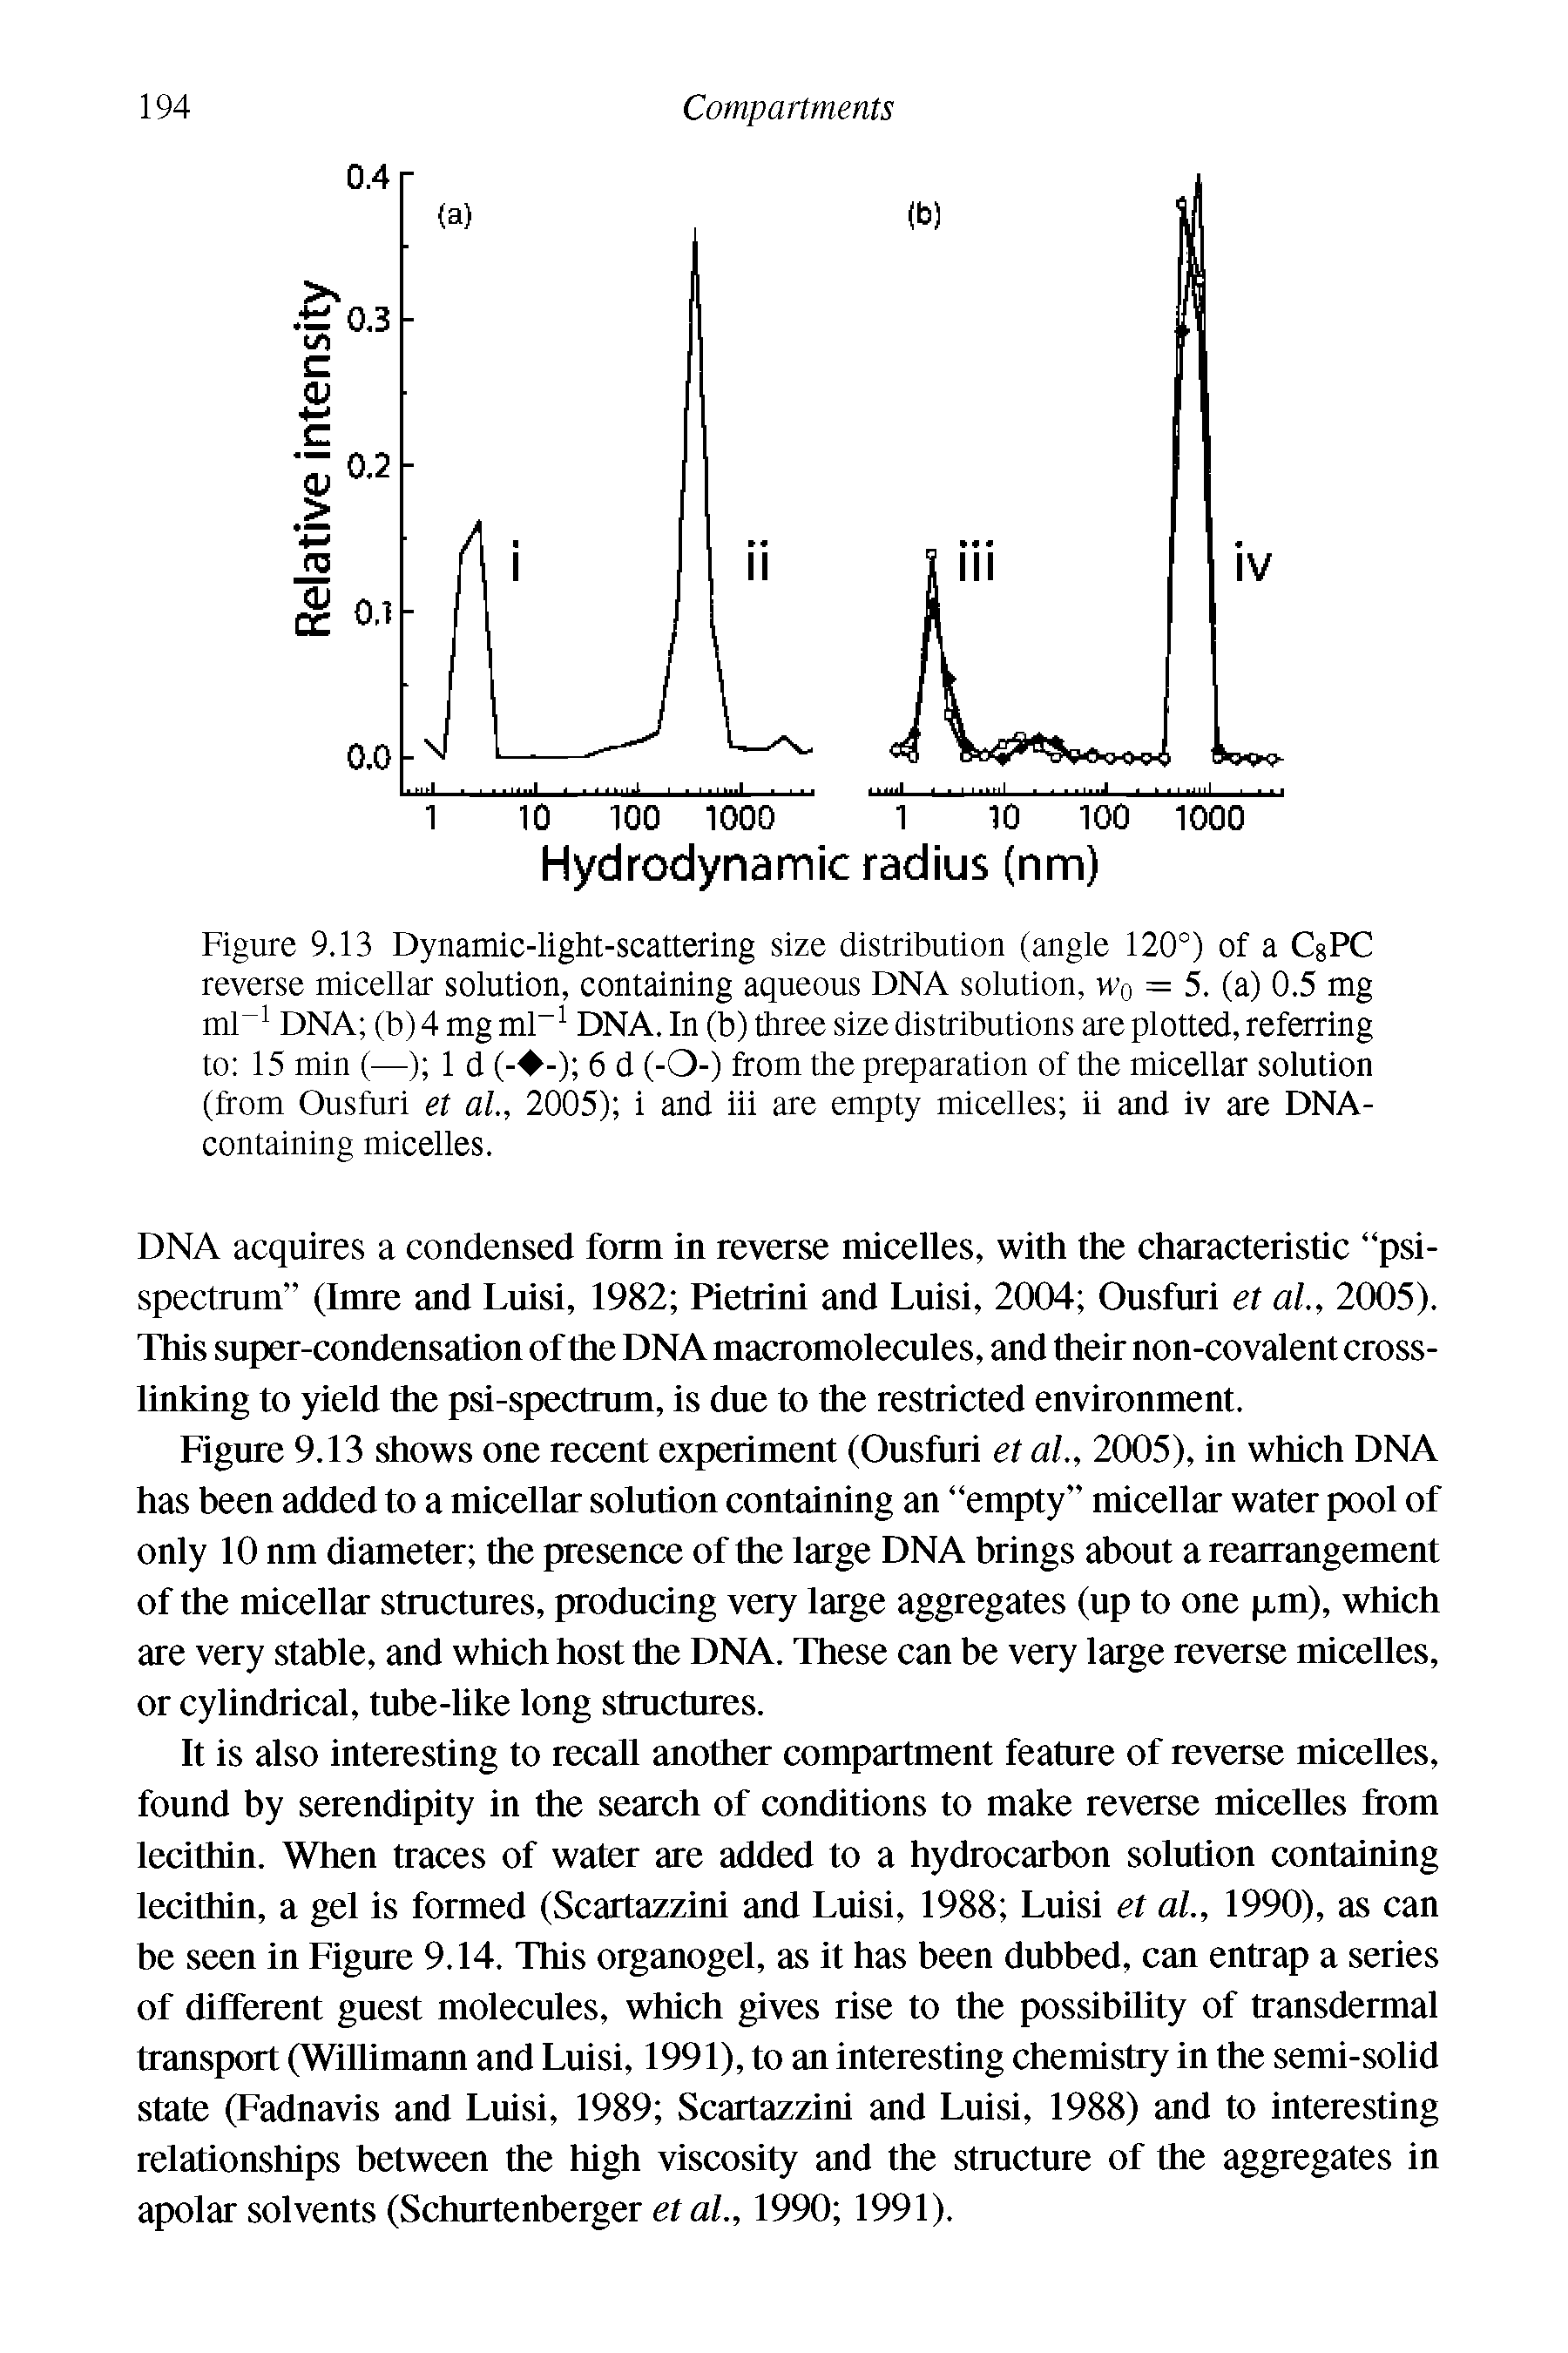 Figure 9.13 Dynamic-light-scattering size distribution (angle 120°) of a CgPC reverse micellar solution, containing aqueous DNA solution, wq = 5. (a) 0.5 mg mD DNA (b) 4 mg ml DNA. In (b) three size distributions are plotted, referring to 15 min (—) 1 d (- -) 6 d (-0-) from the preparation of the micellar solution (from Ousfuri et al, 2005) i and iii are empty micelles ii and iv are DNA-containing micelles.